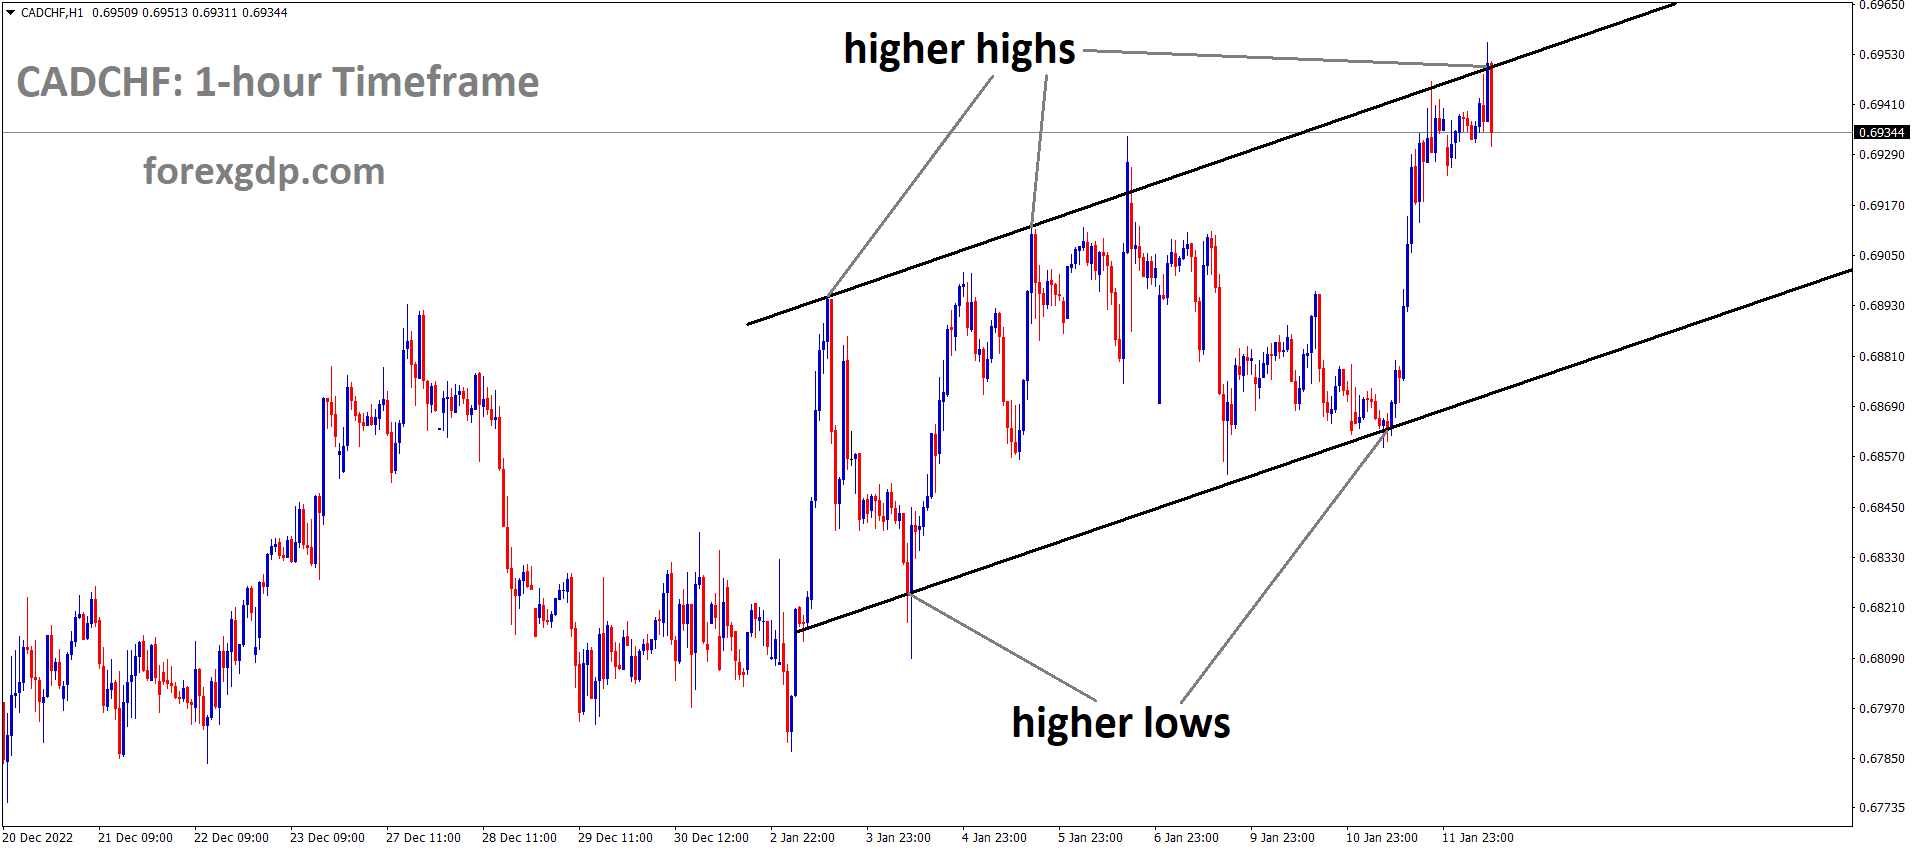 CADCHF is moving in an Ascending channel and the market has reached the higher high area of the channel